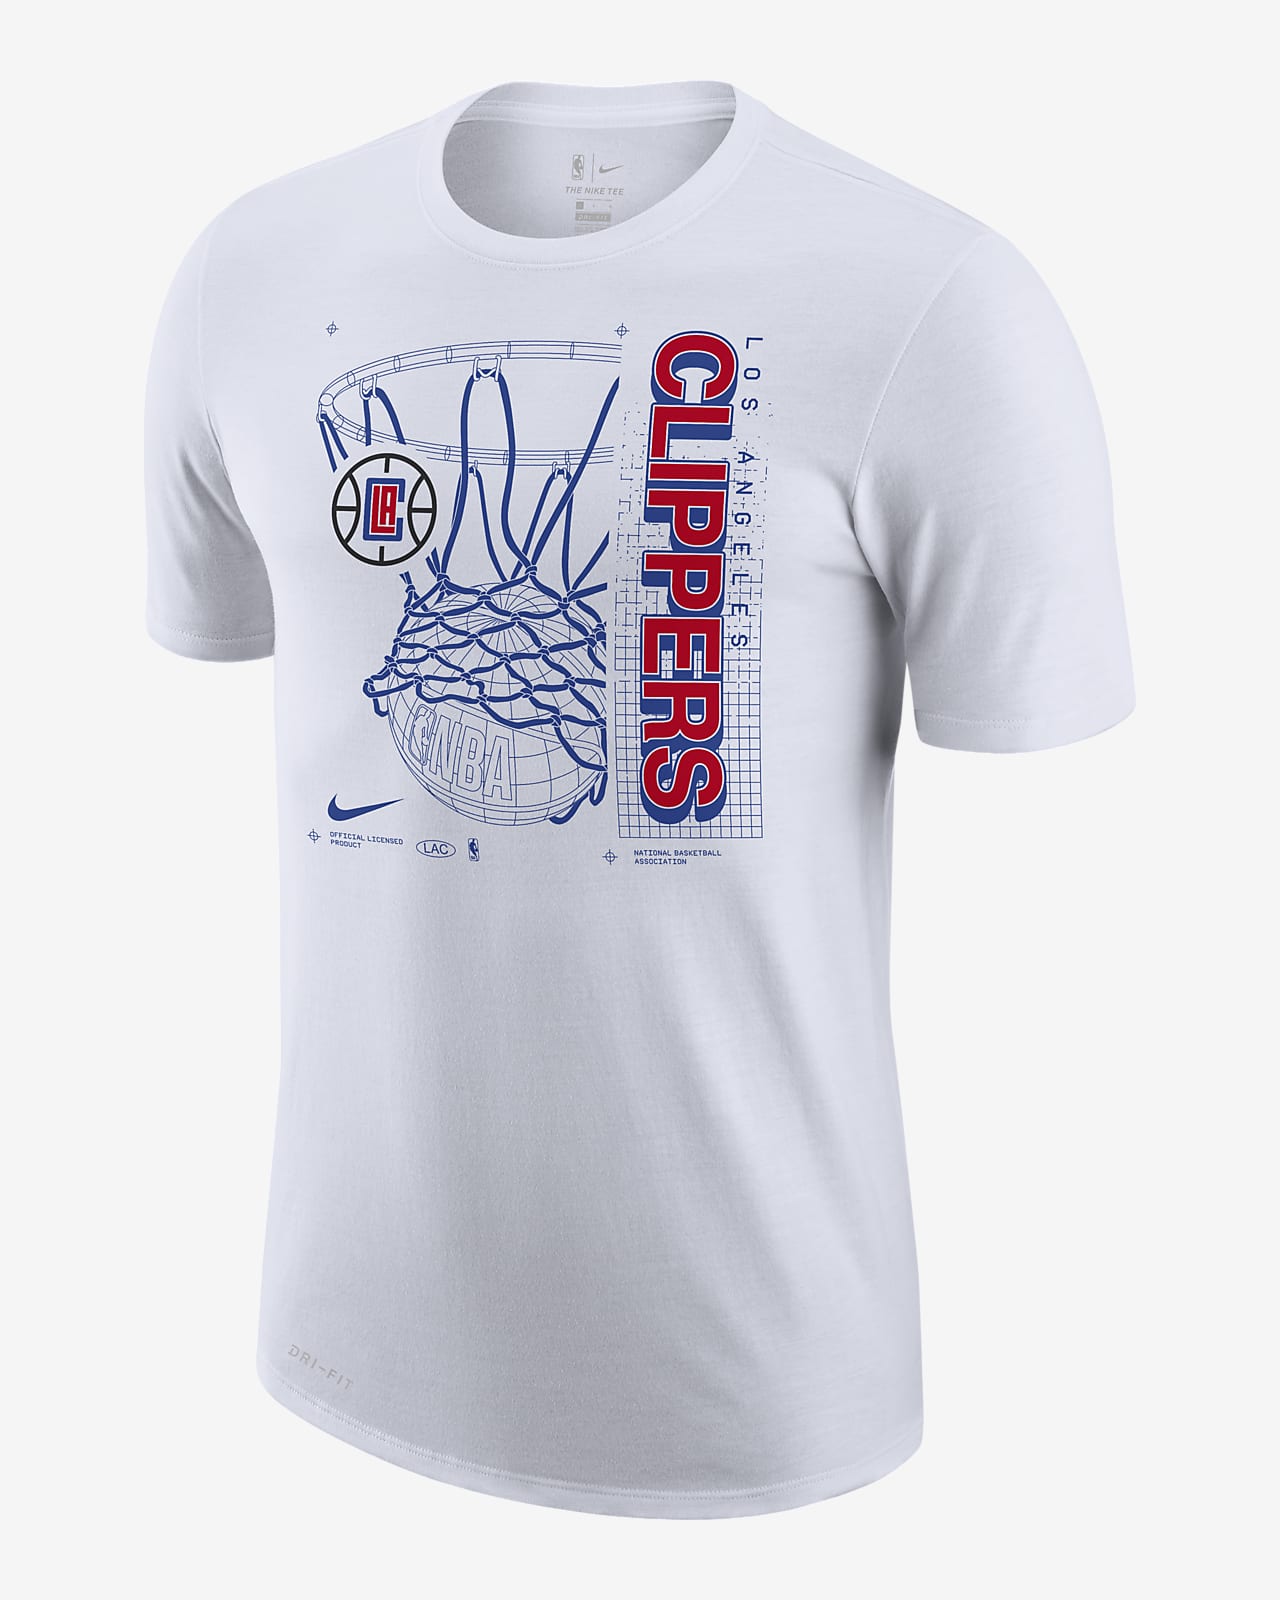 clippers nike shirt